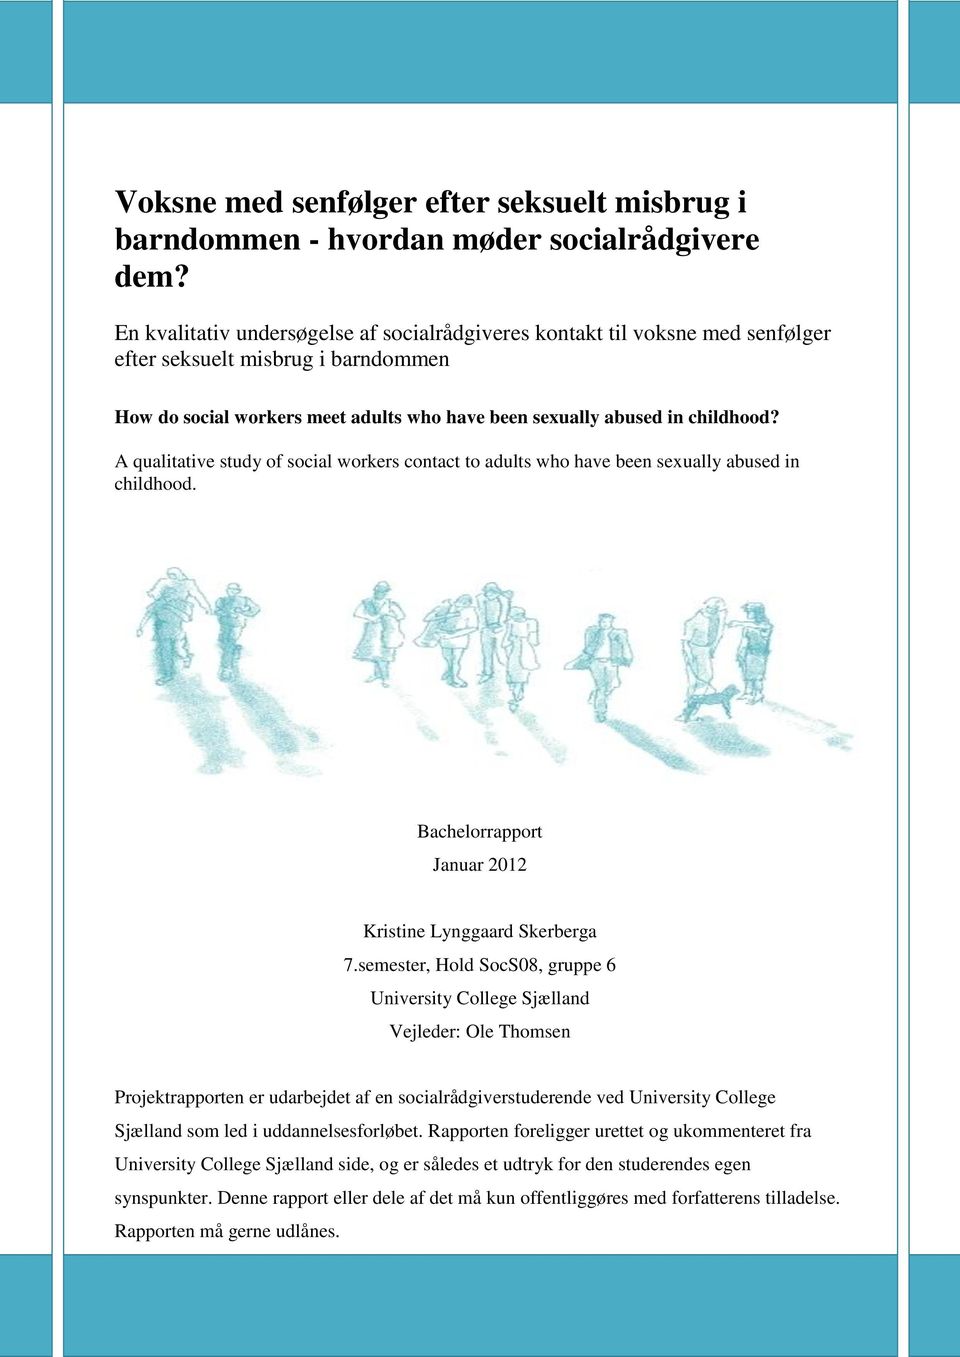 A qualitative study of social workers contact to adults who have been sexually abused in childhood. Bachelorrapport Januar 2012 Kristine Lynggaard Skerberga 7.